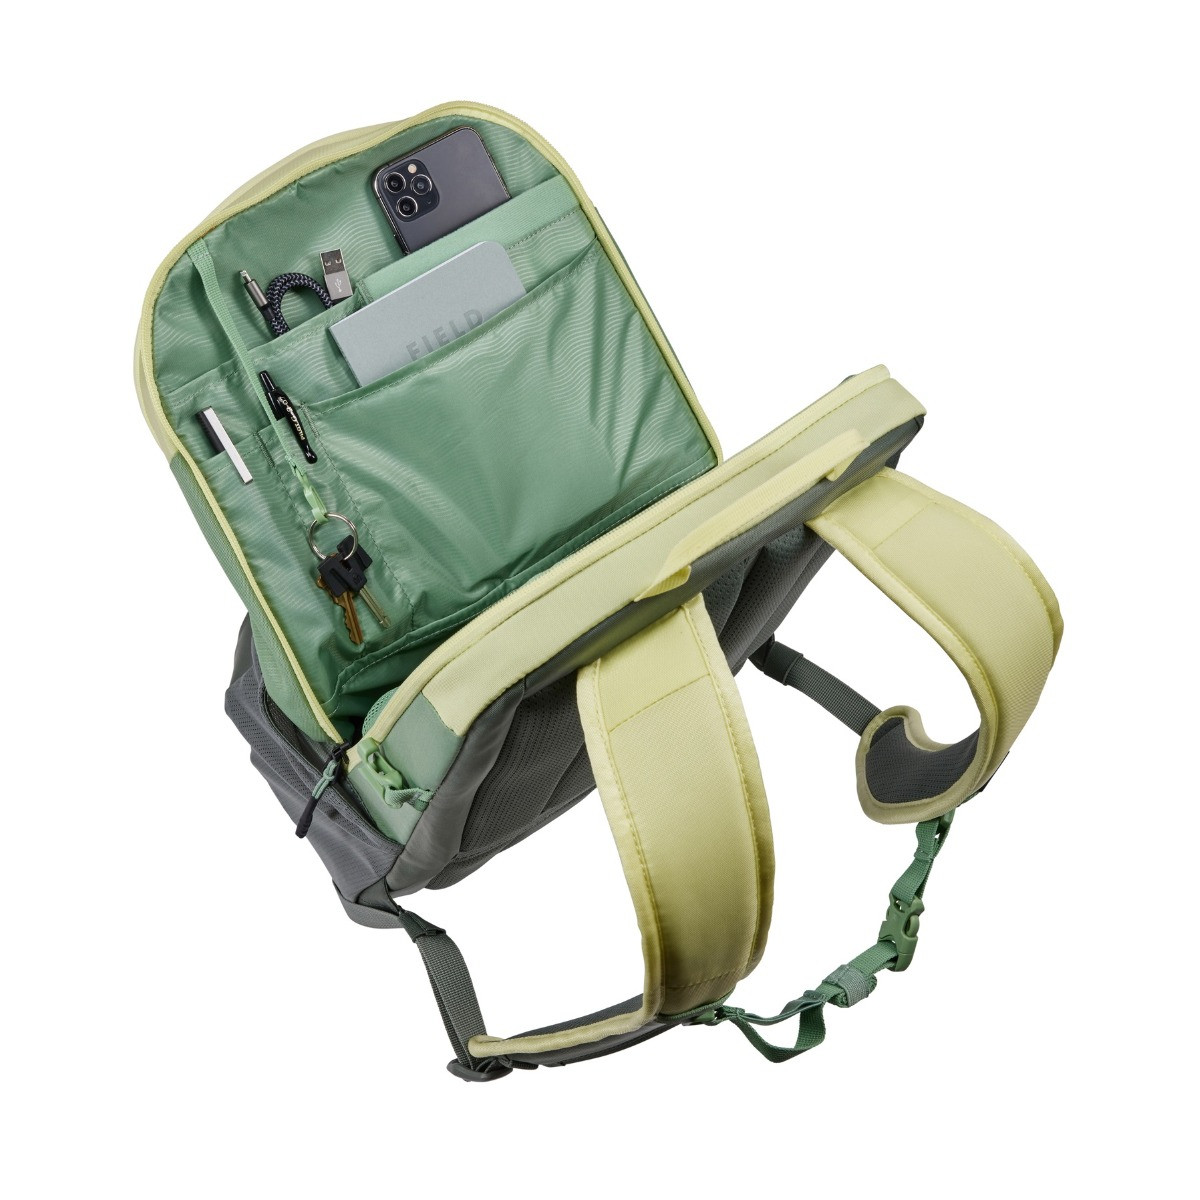 Rucsac urban cu compartiment laptop Thule EnRoute Backpack 23L Agave Green/Basil Green